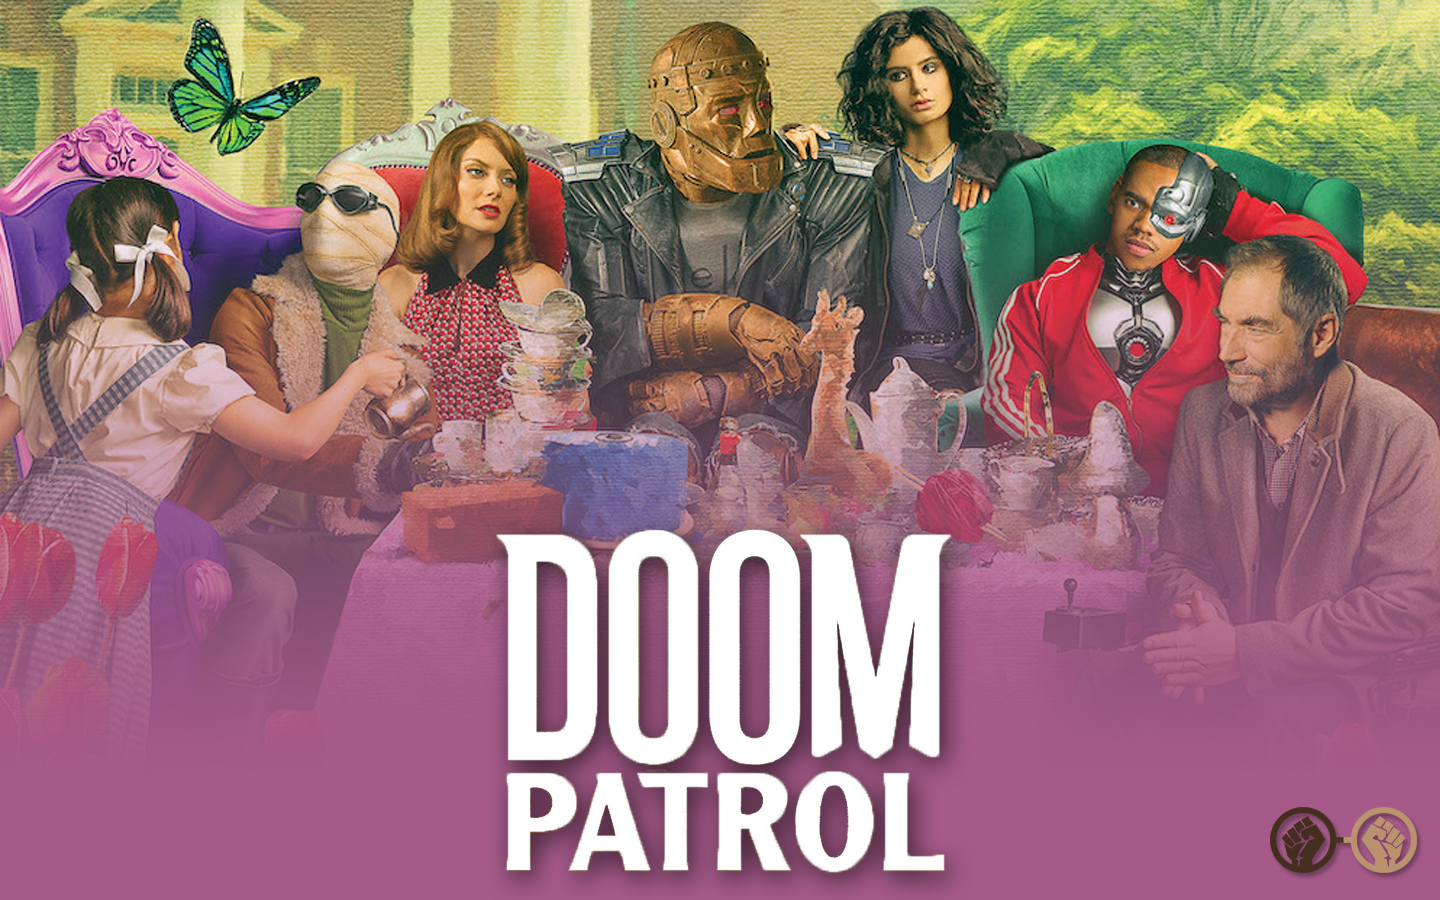 ‘Doom Patrol’ Season 2 Gives Audiences Even More to Love – Review